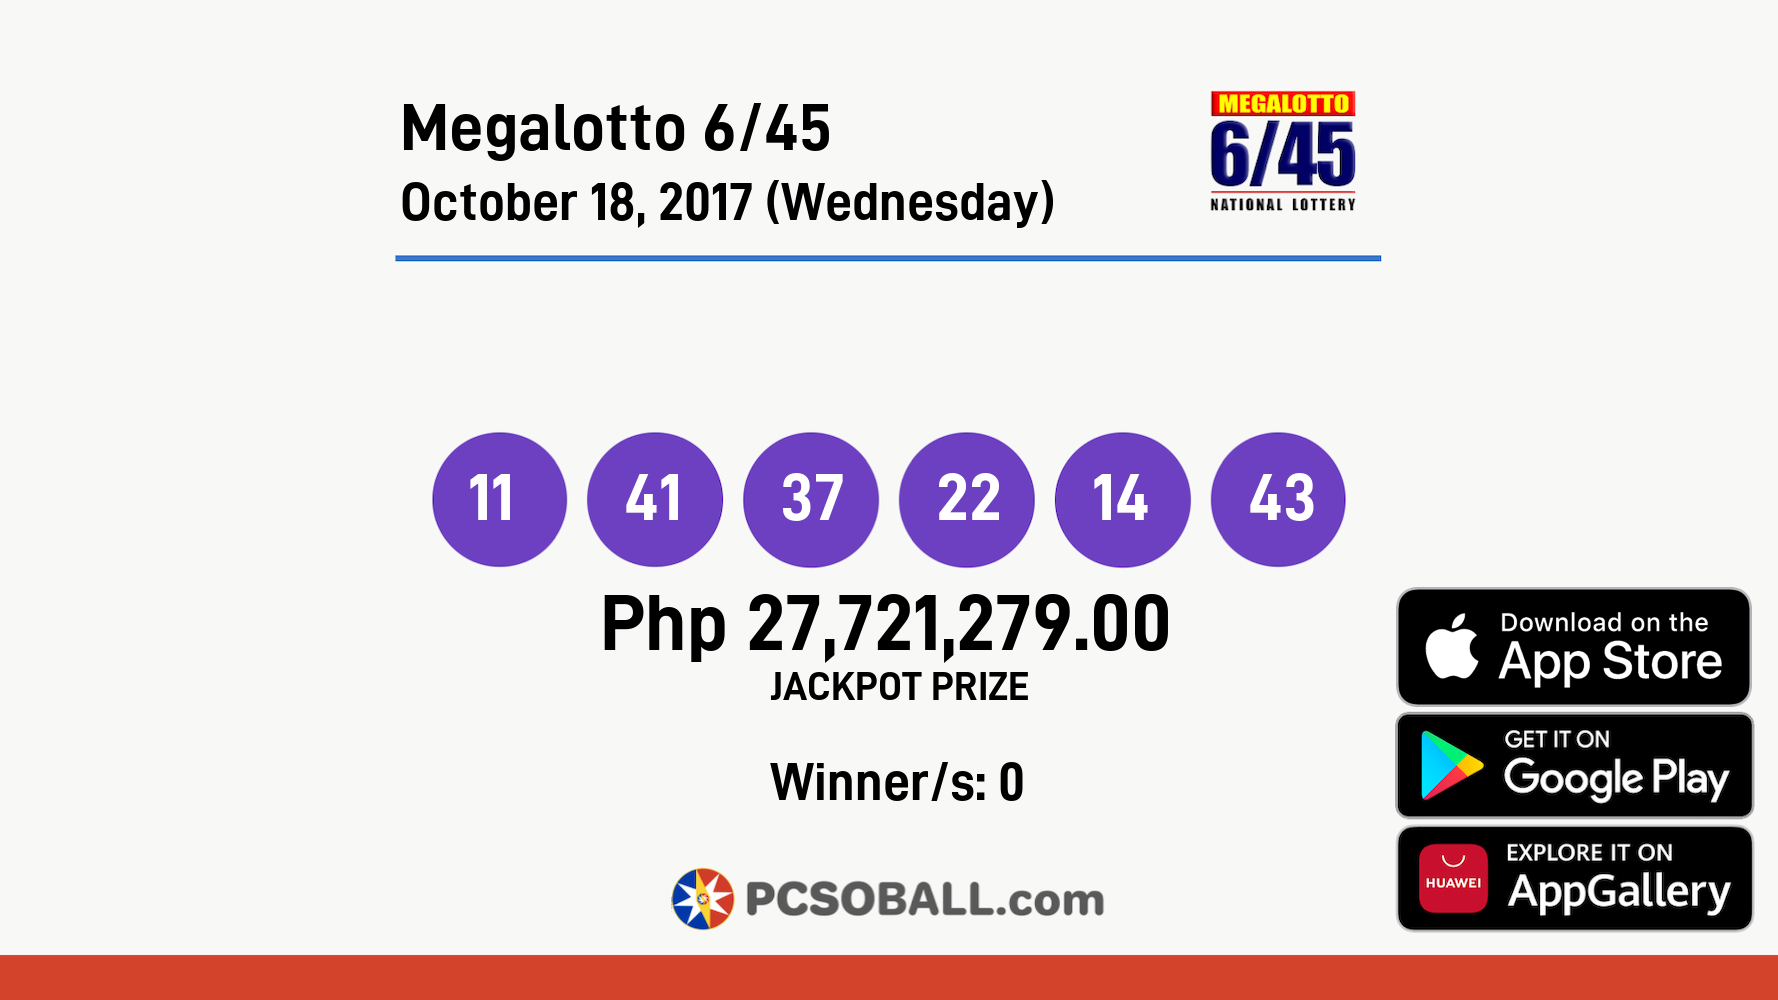 Megalotto 6/45 October 18, 2017 (Wednesday) Result